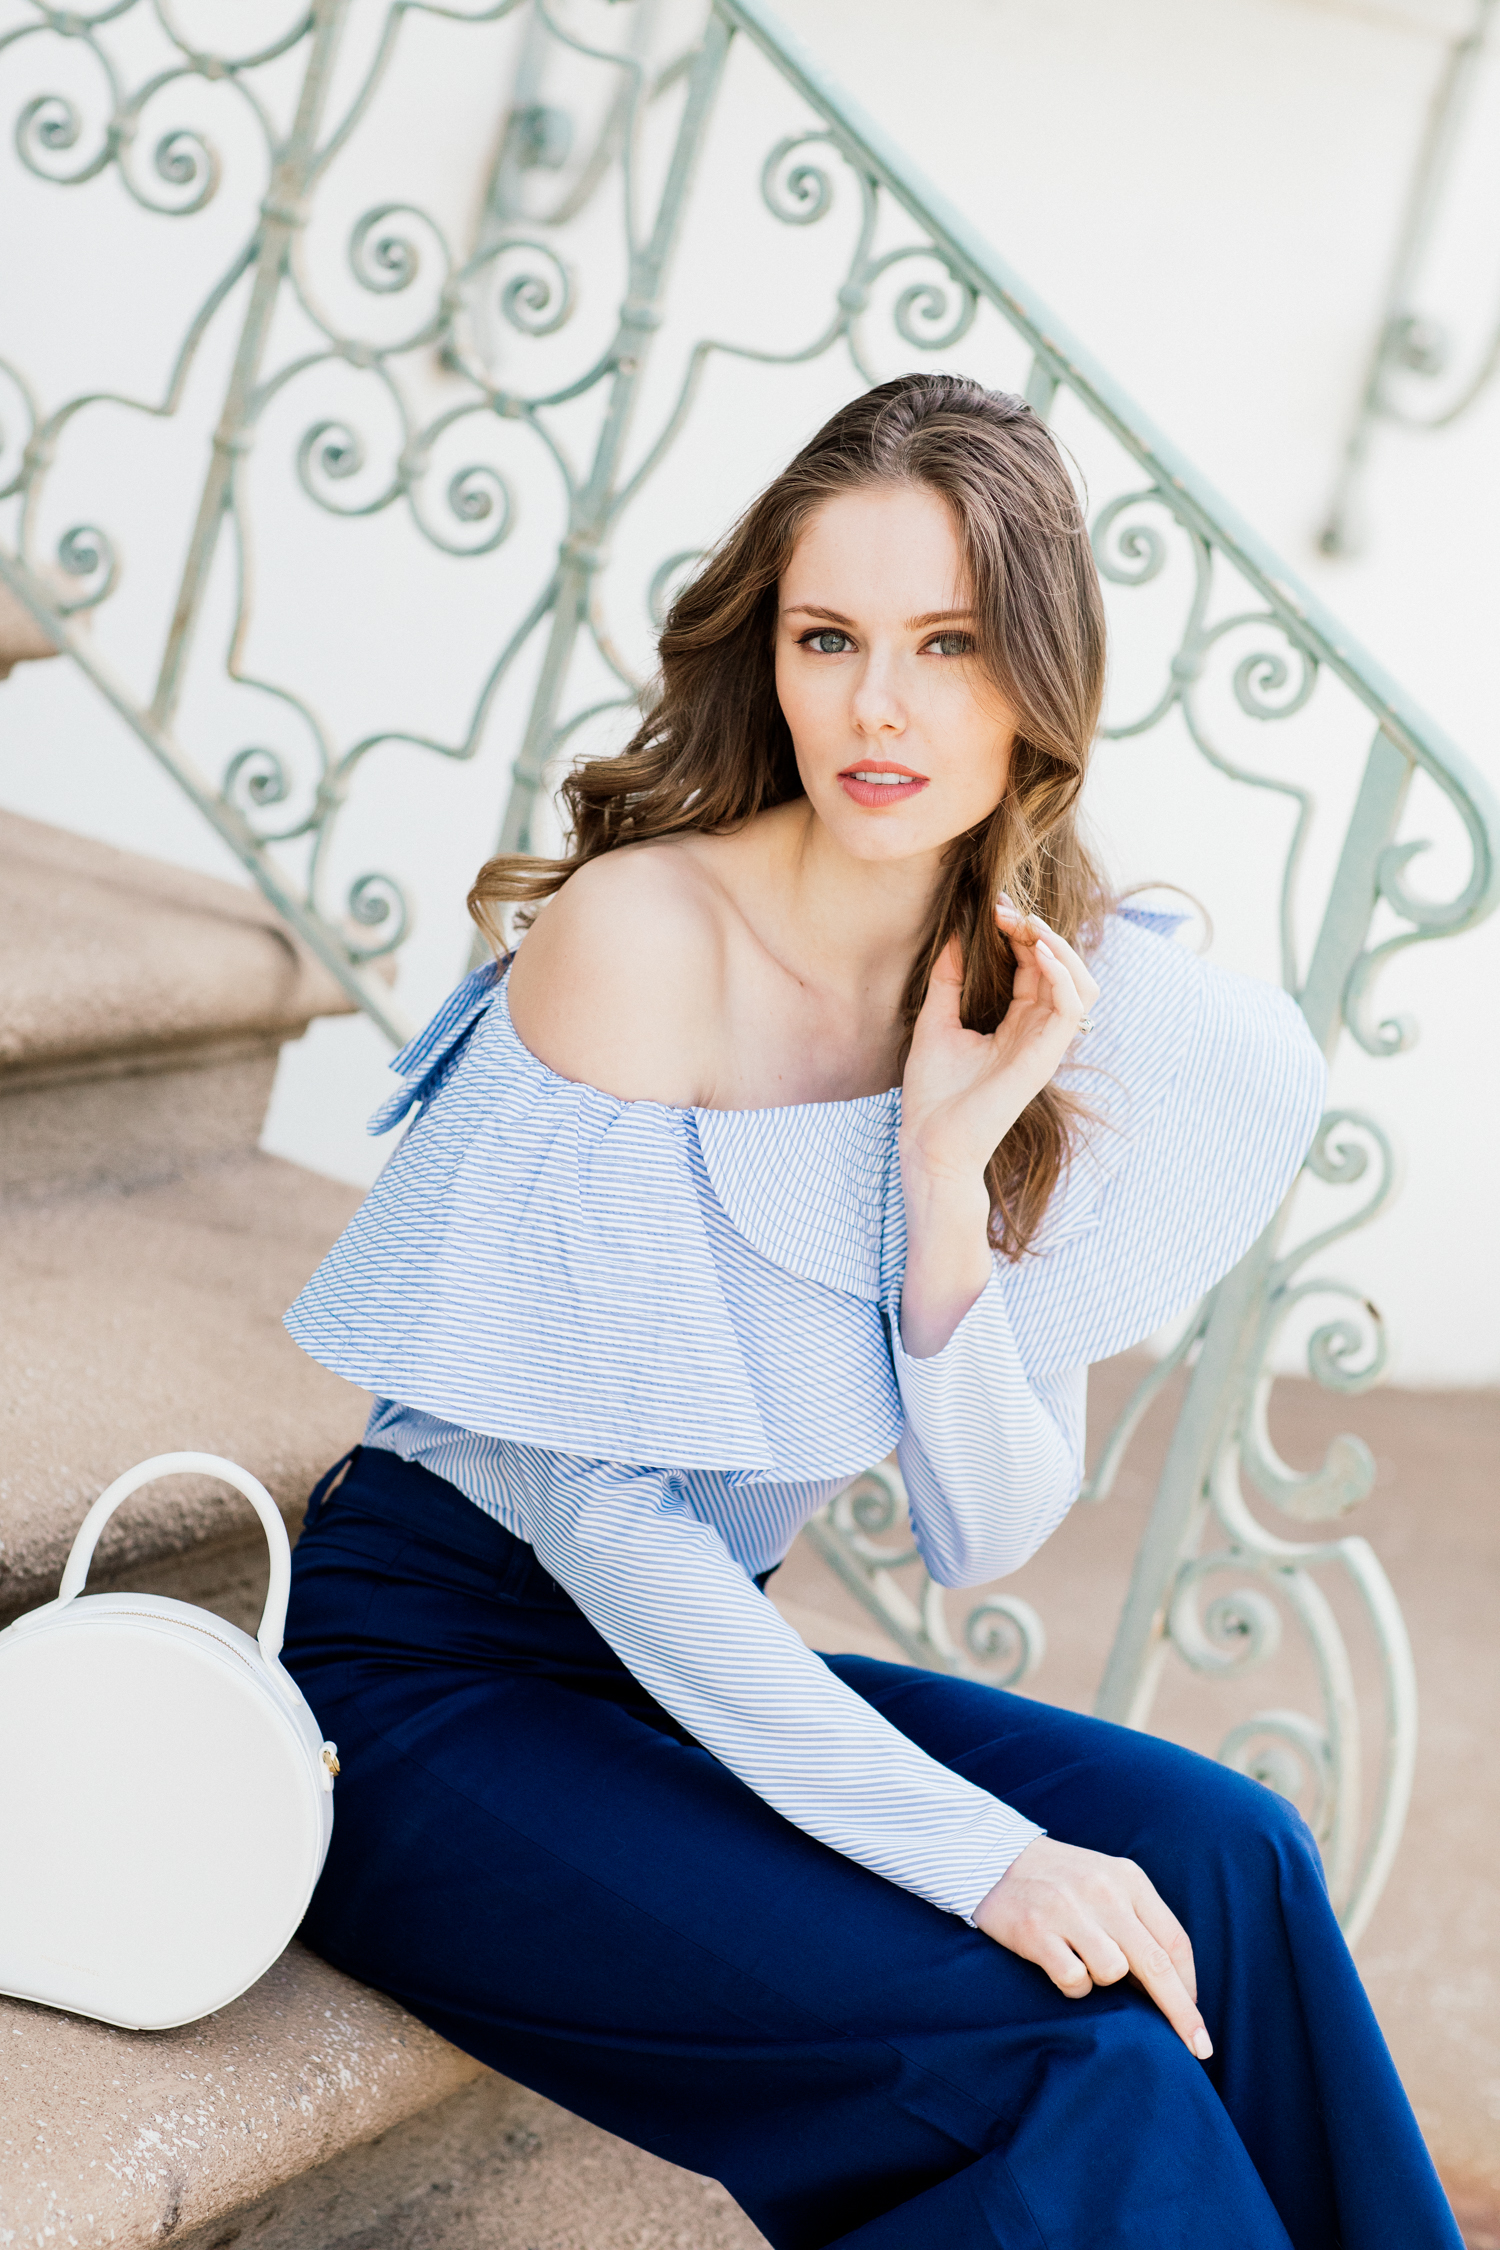 Alyssa Campanella of The A List blog shares white accessories for spring in Staud Novak pants and Mansur Gavriel white circle bag